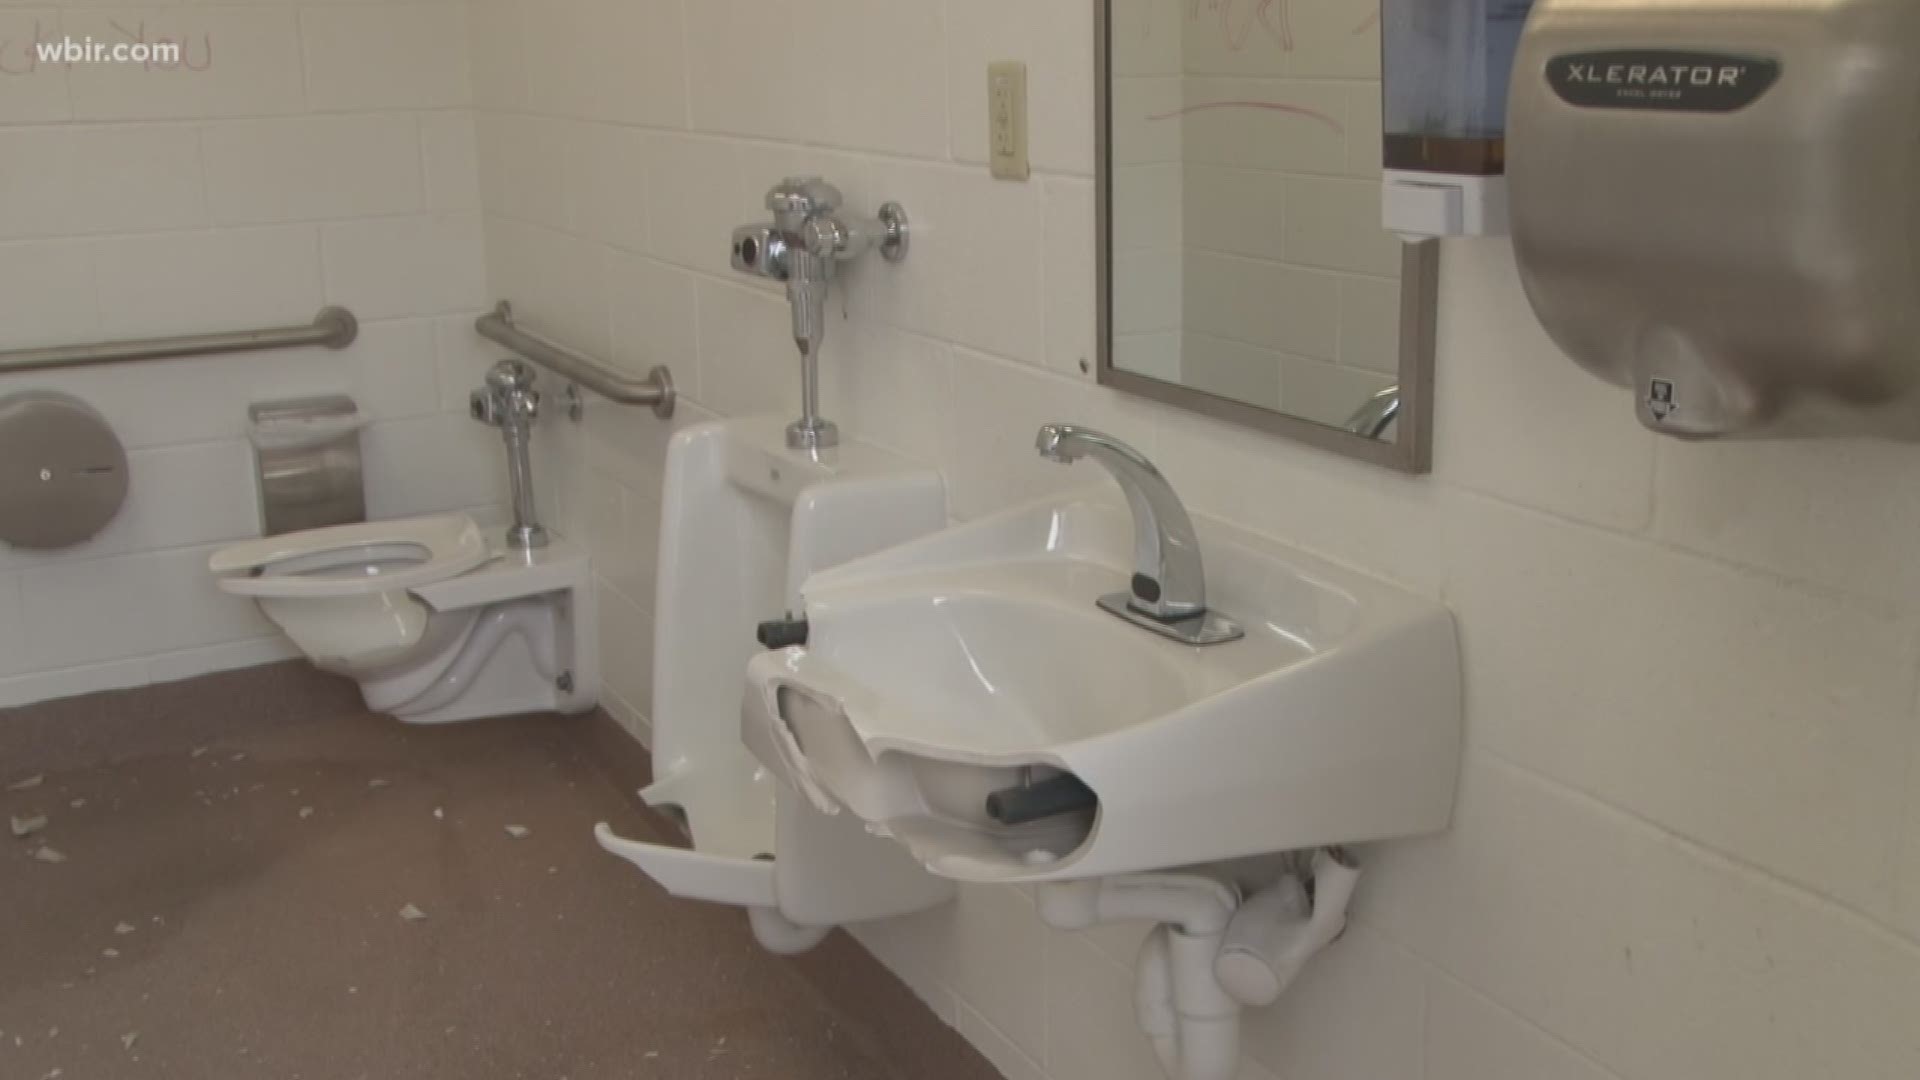 Dozens of folks took to Facebook - upset about the damage to the restrooms at TVA Lakeshore Park.